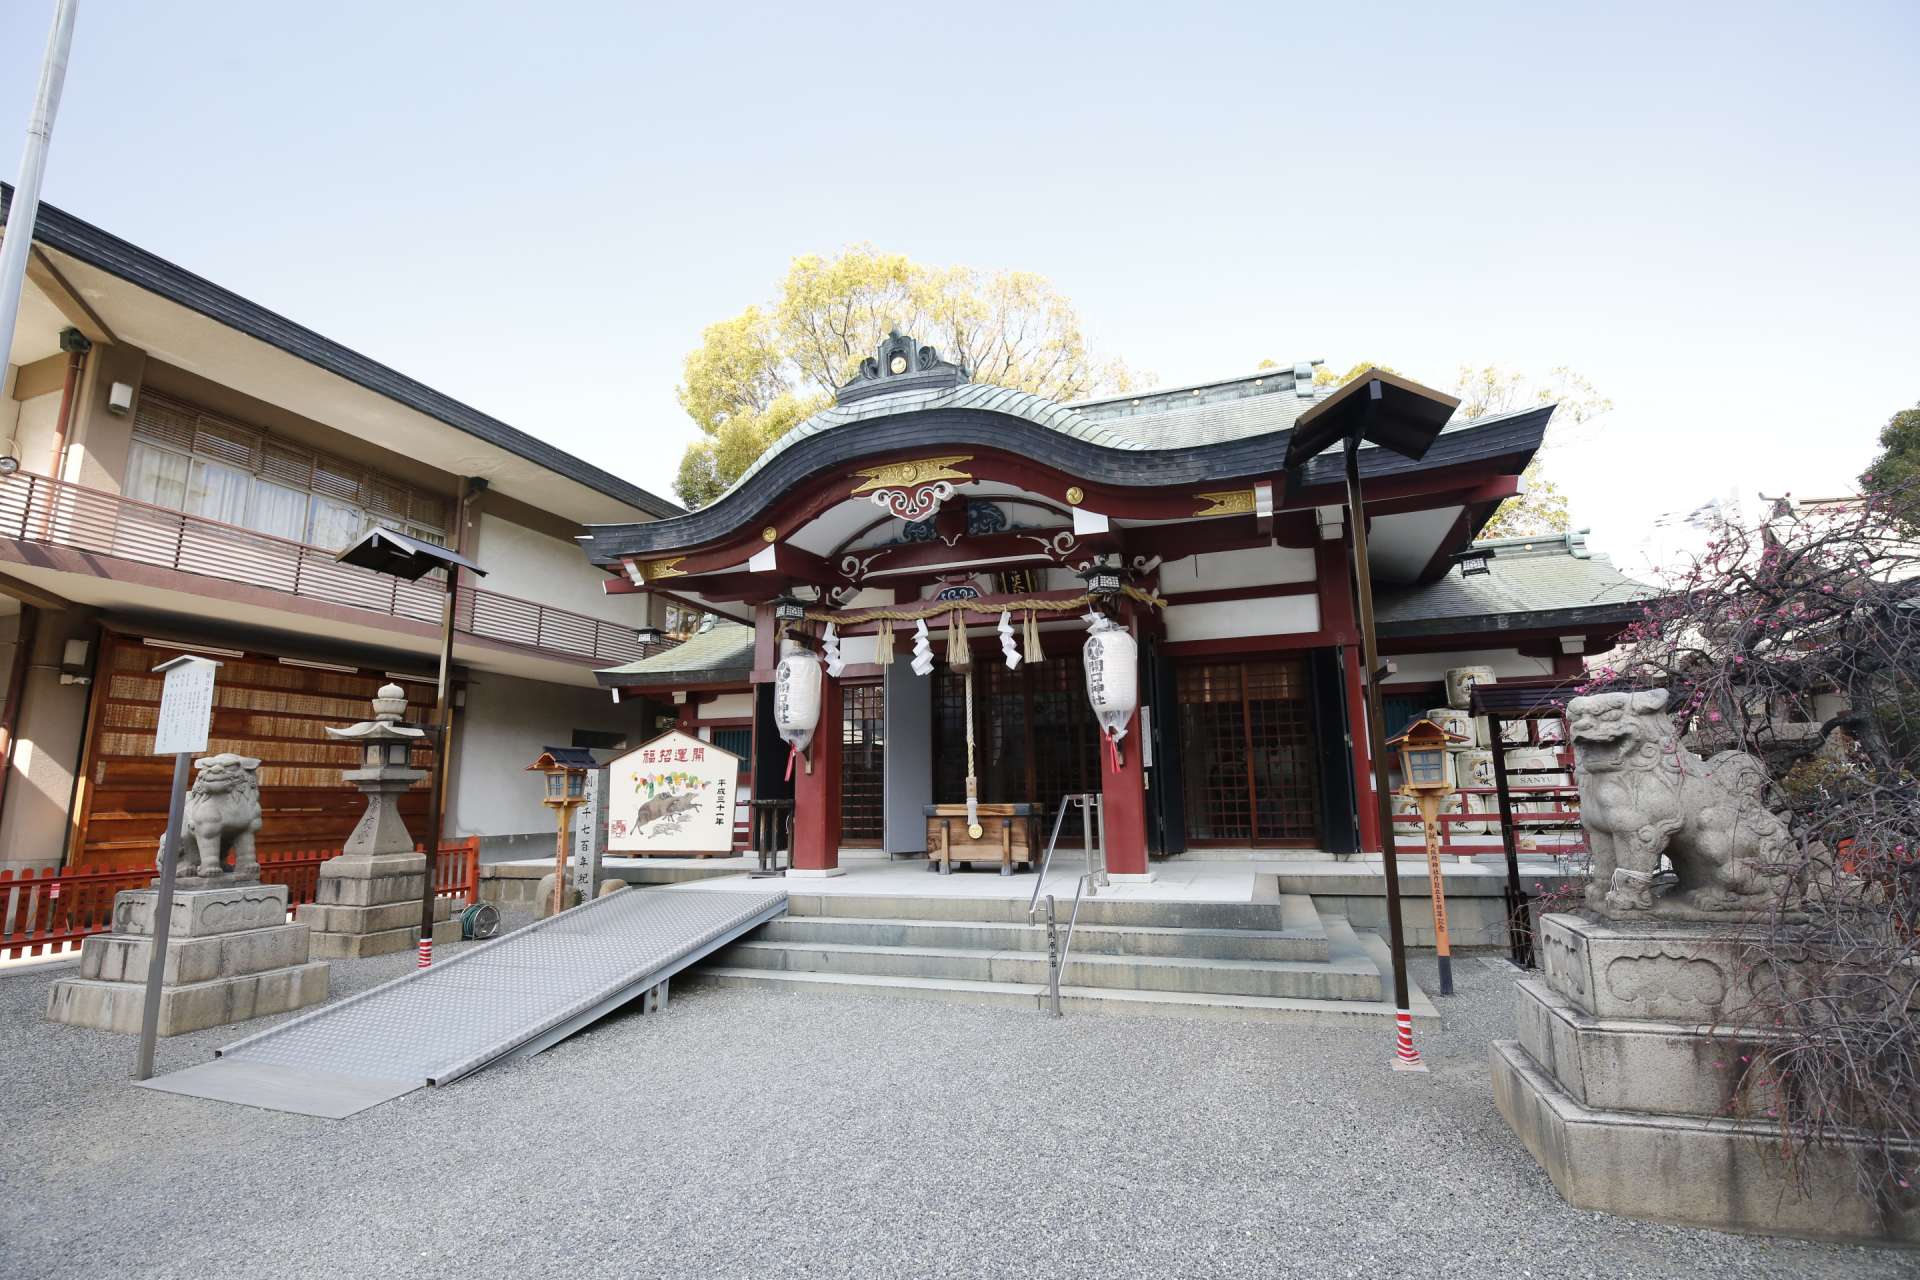 Learn about Japan’s Shinto/spiritual culture, Shrine Maiden Experience